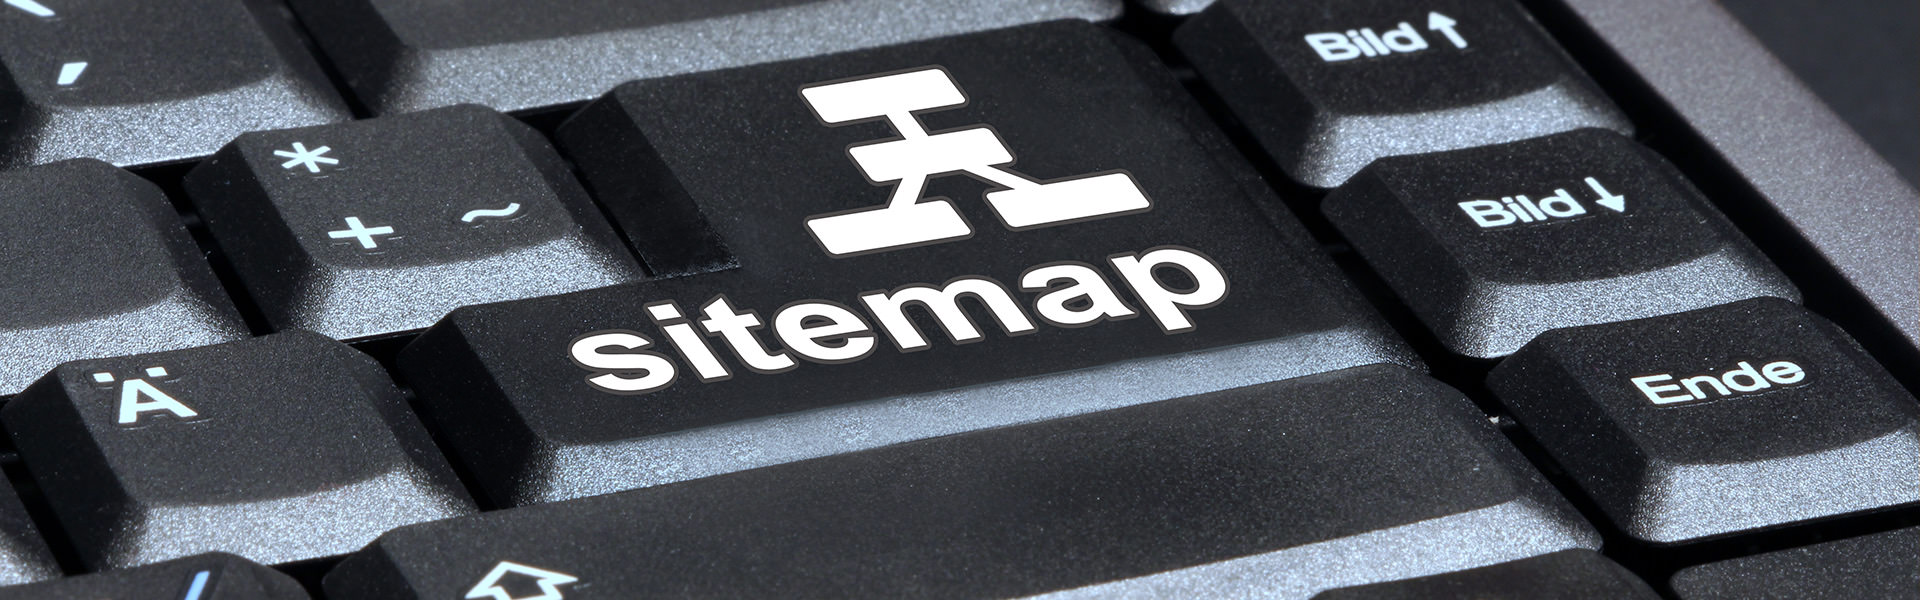 Keyboard with sitemap word